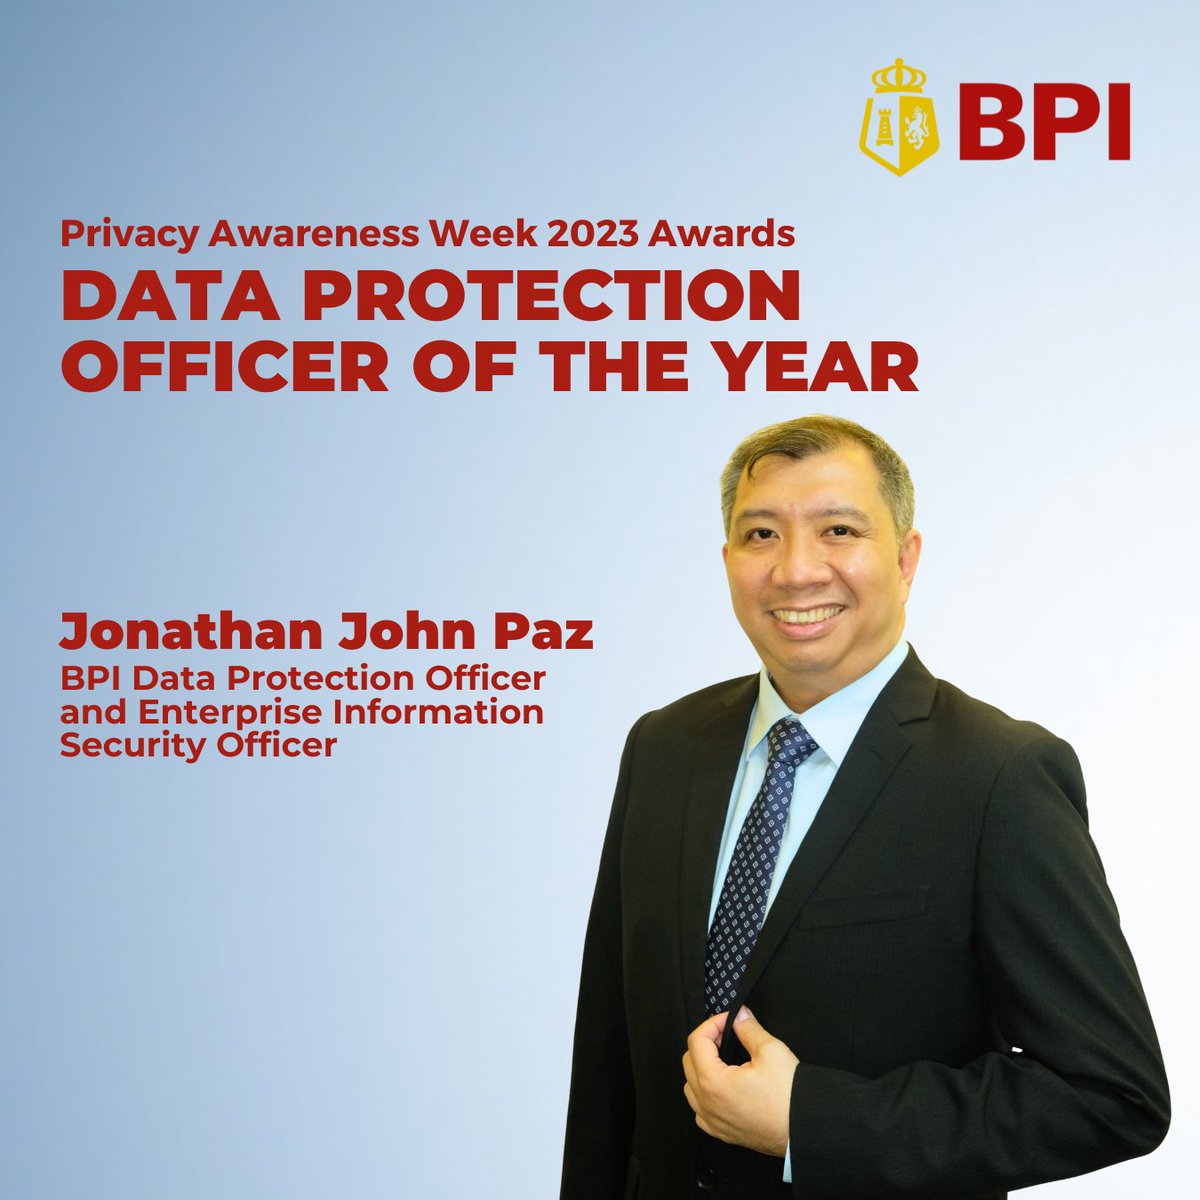 Congratulations to our very own Data Protection Officer and Enterprise Information Security Officer, Jonathan John Paz, for winning Data Protection Officer of the Year at the National Privacy Commission's Privacy Awareness Week 2023 Awards!

#PrivacyAwarenessWeek